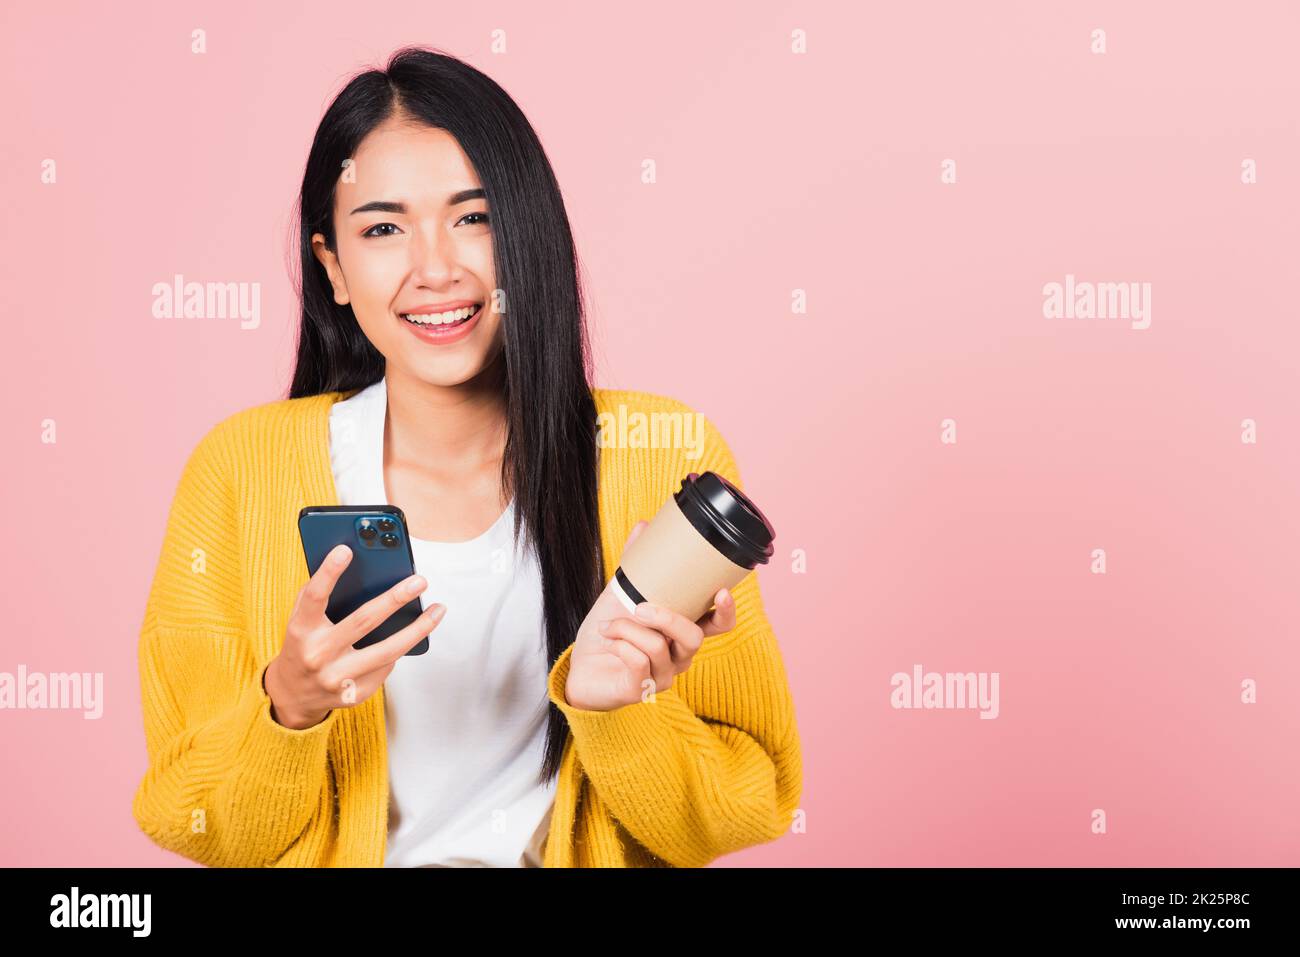 Happy Asian portrait beautiful cute young woman excited smiling holding mobile phone and coffee to go, studio shot isolated on pink background, female using smartphone with coffee cup take away Stock Photo